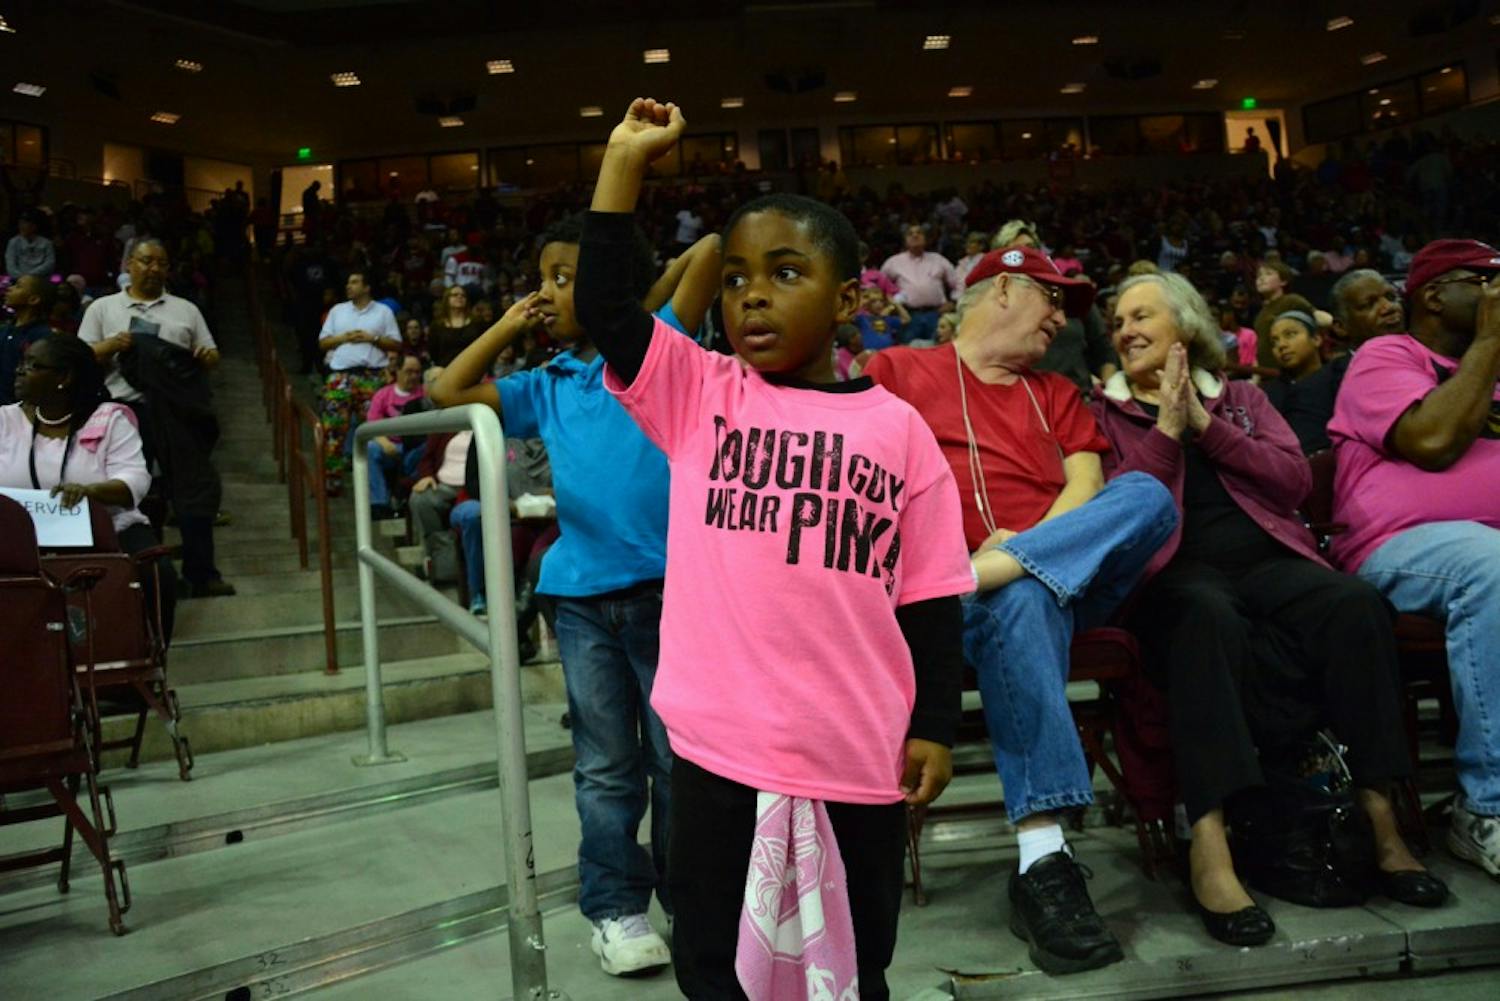 Who says pink is for girls? Both USC and UGA fans of all ages came together at the women's basketball match on Thursday night to aid in breast cancer awareness. South Carolina Gamecocks vs Georgia Bulldogs. Colonial Life Arena, Columbia, SC. February 18, 2016